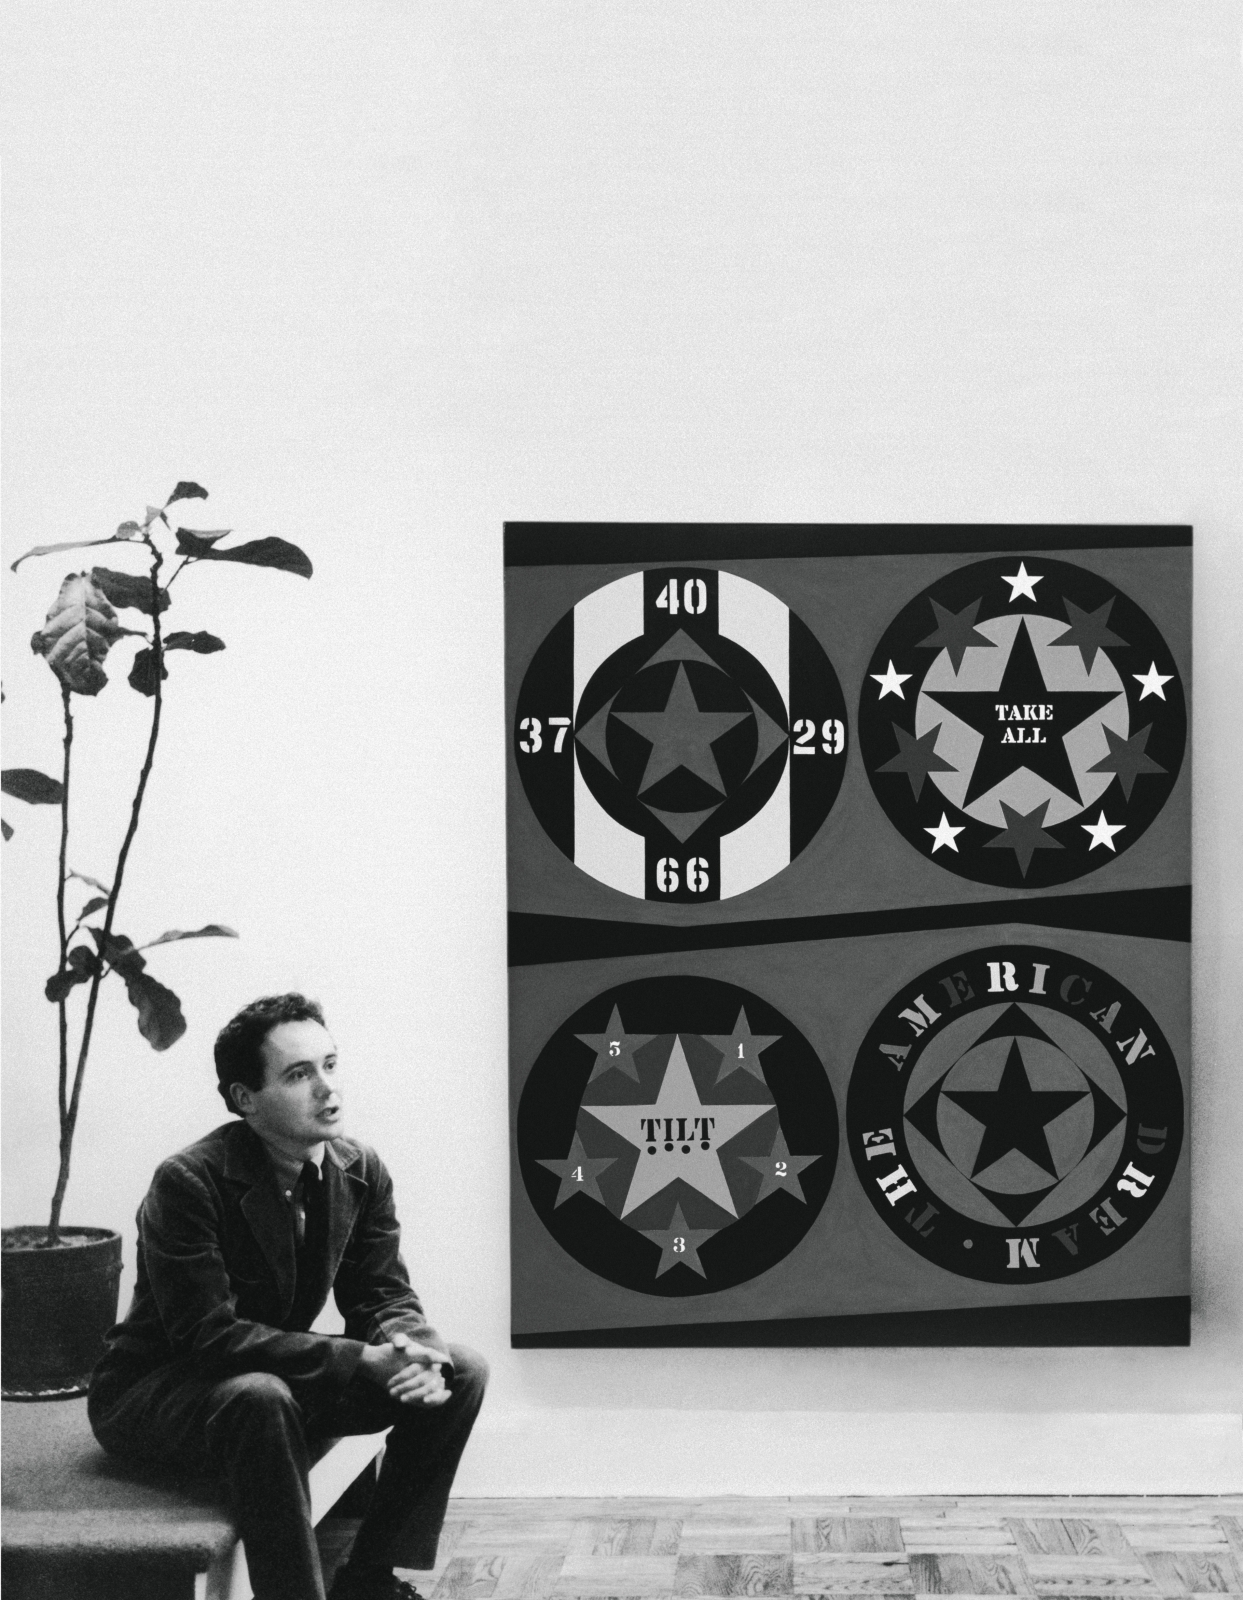 Robert Indiana with The American Dream, I&nbsp;(1960&ndash;61) at the David Anderson Gallery, New York, 1961.&nbsp;Photo: Hans Namuth/Posthumous digital reproduction from original negative/ Hans Namuth Archive, Center for Creative Photography &copy; 1991 Hans Namuth Estate